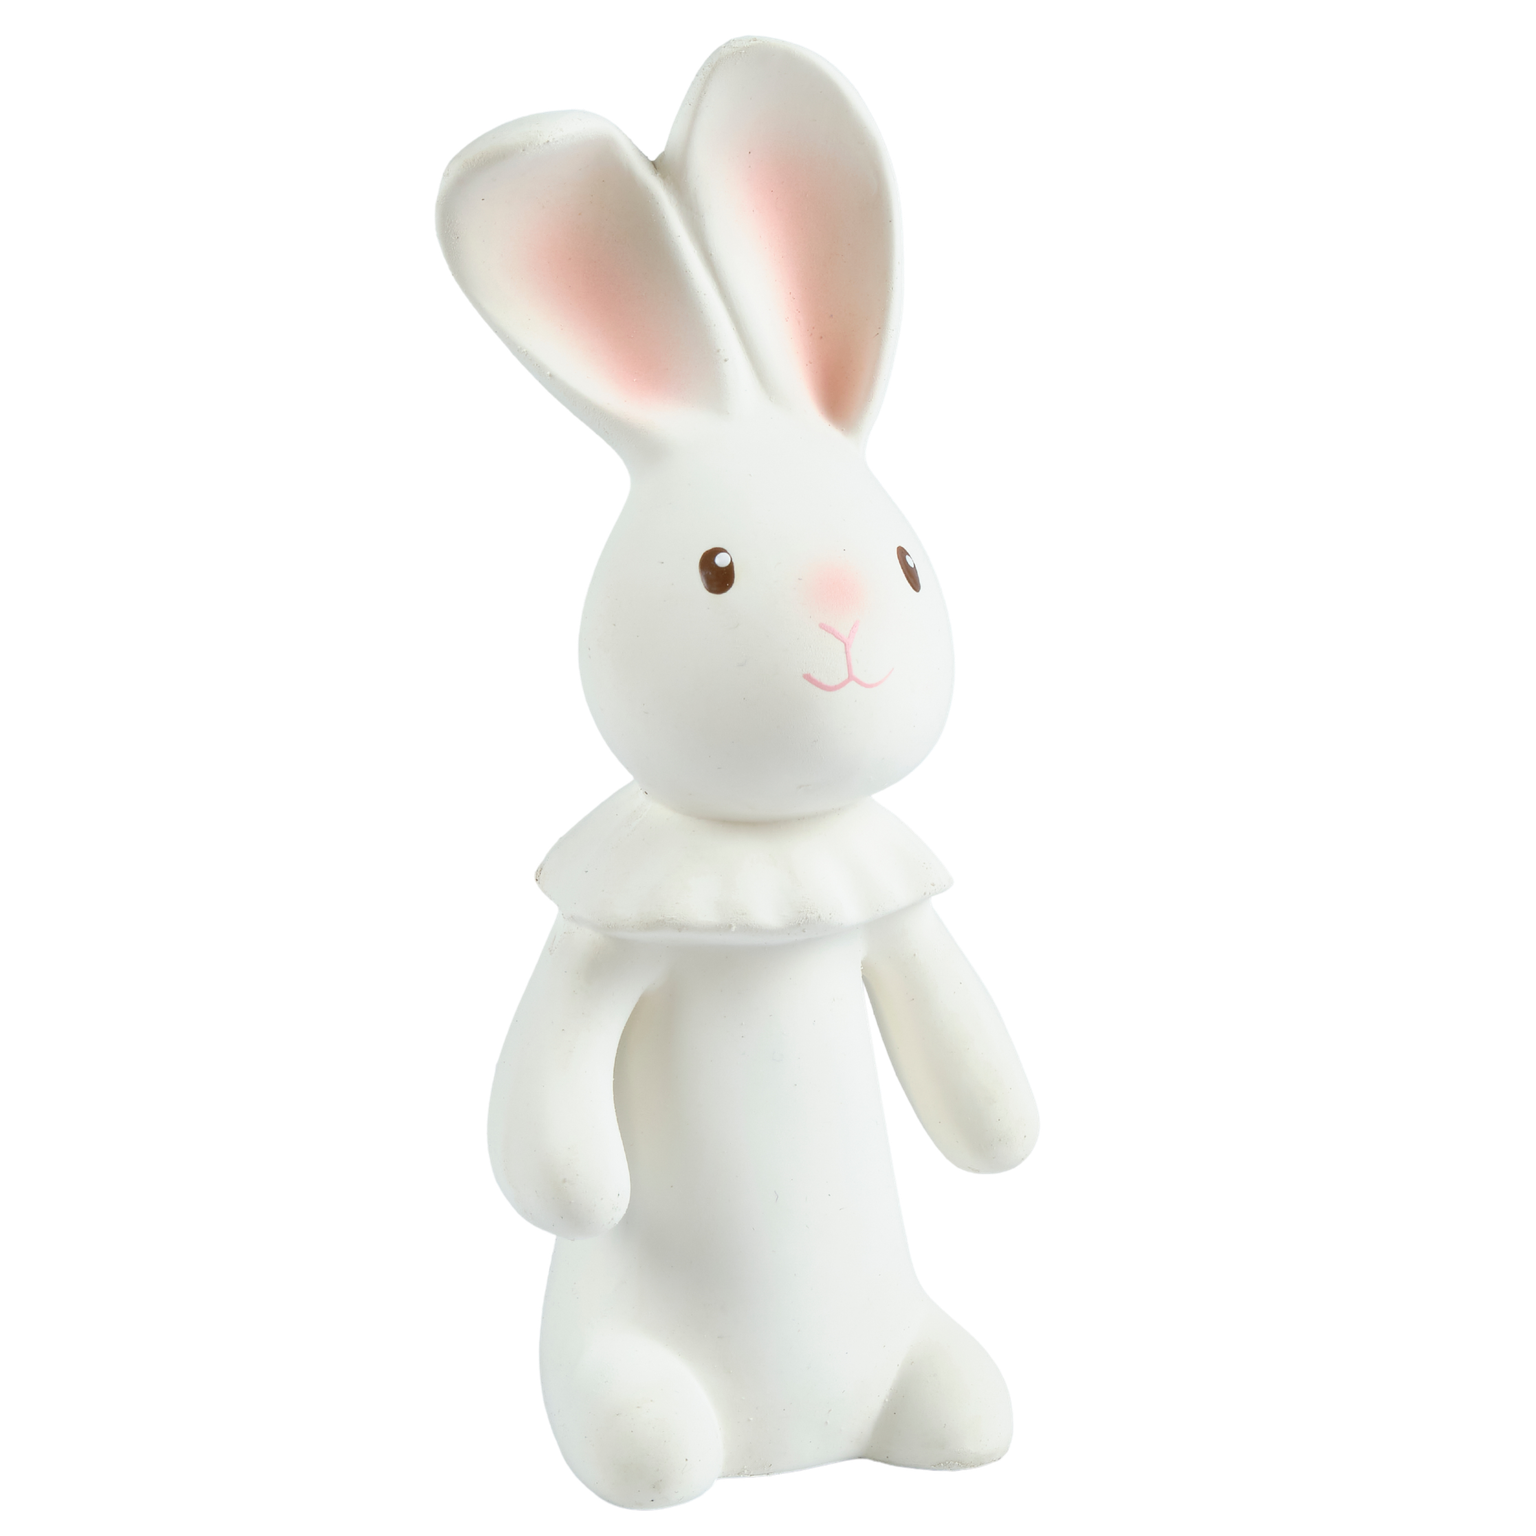 Havah the Bunny - All Rubber Squeaker Toy